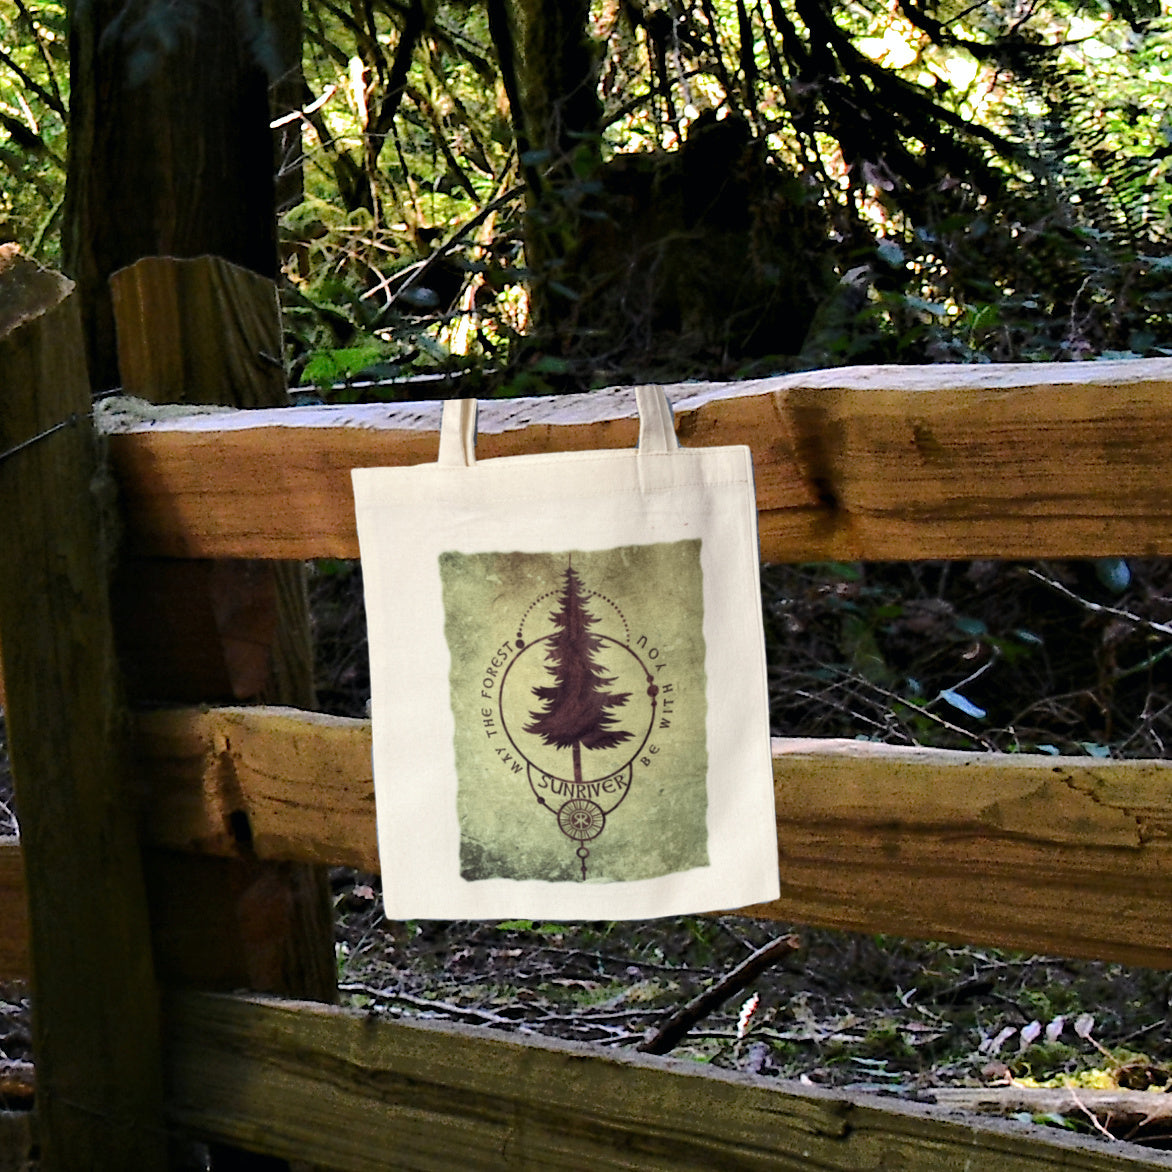 Sunriver Oregon - May the Forest be with You Pine Tree - Canvas Tote Bag